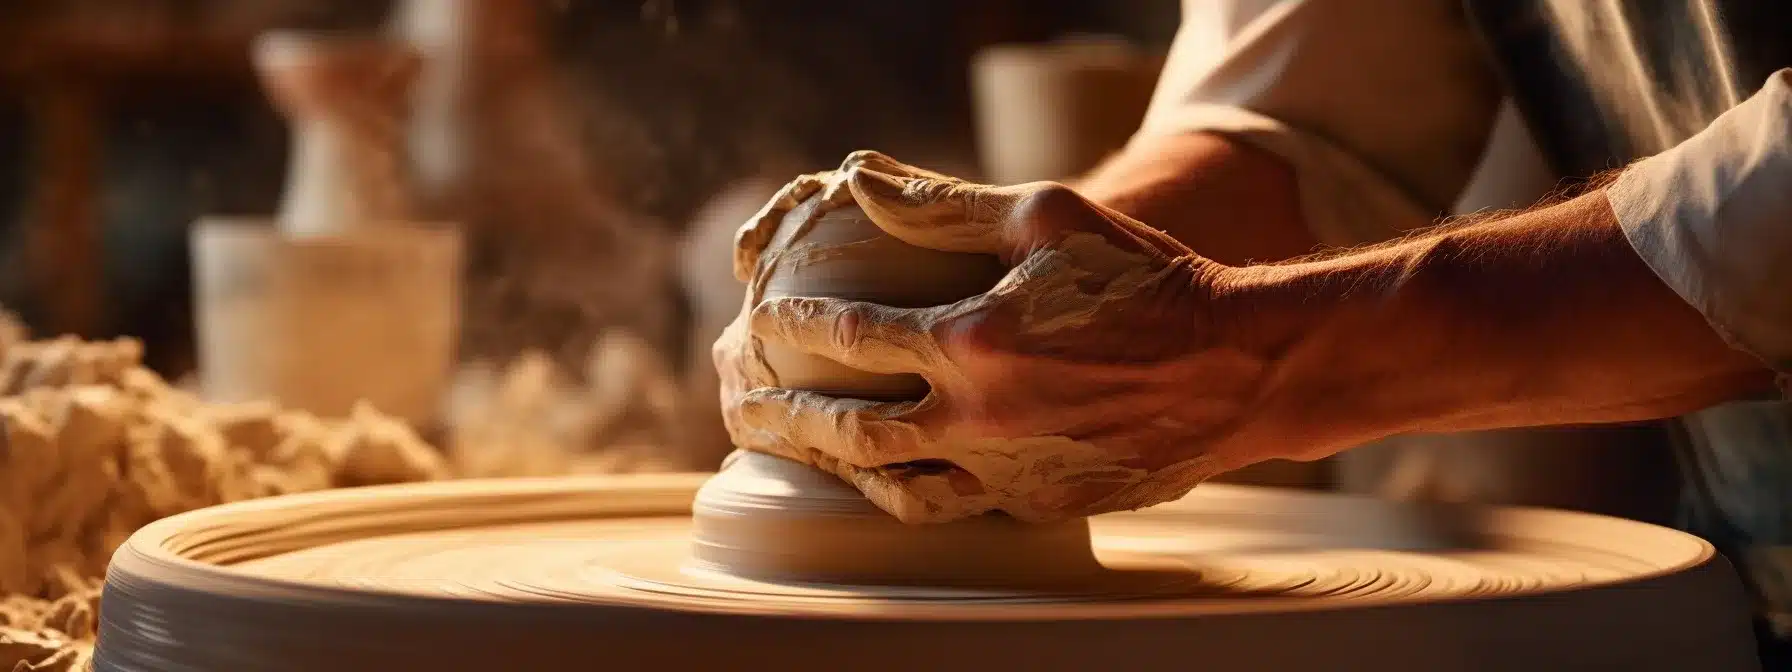 A Potter'S Hands Shaping A Brand Entity On A Spinning Wheel.